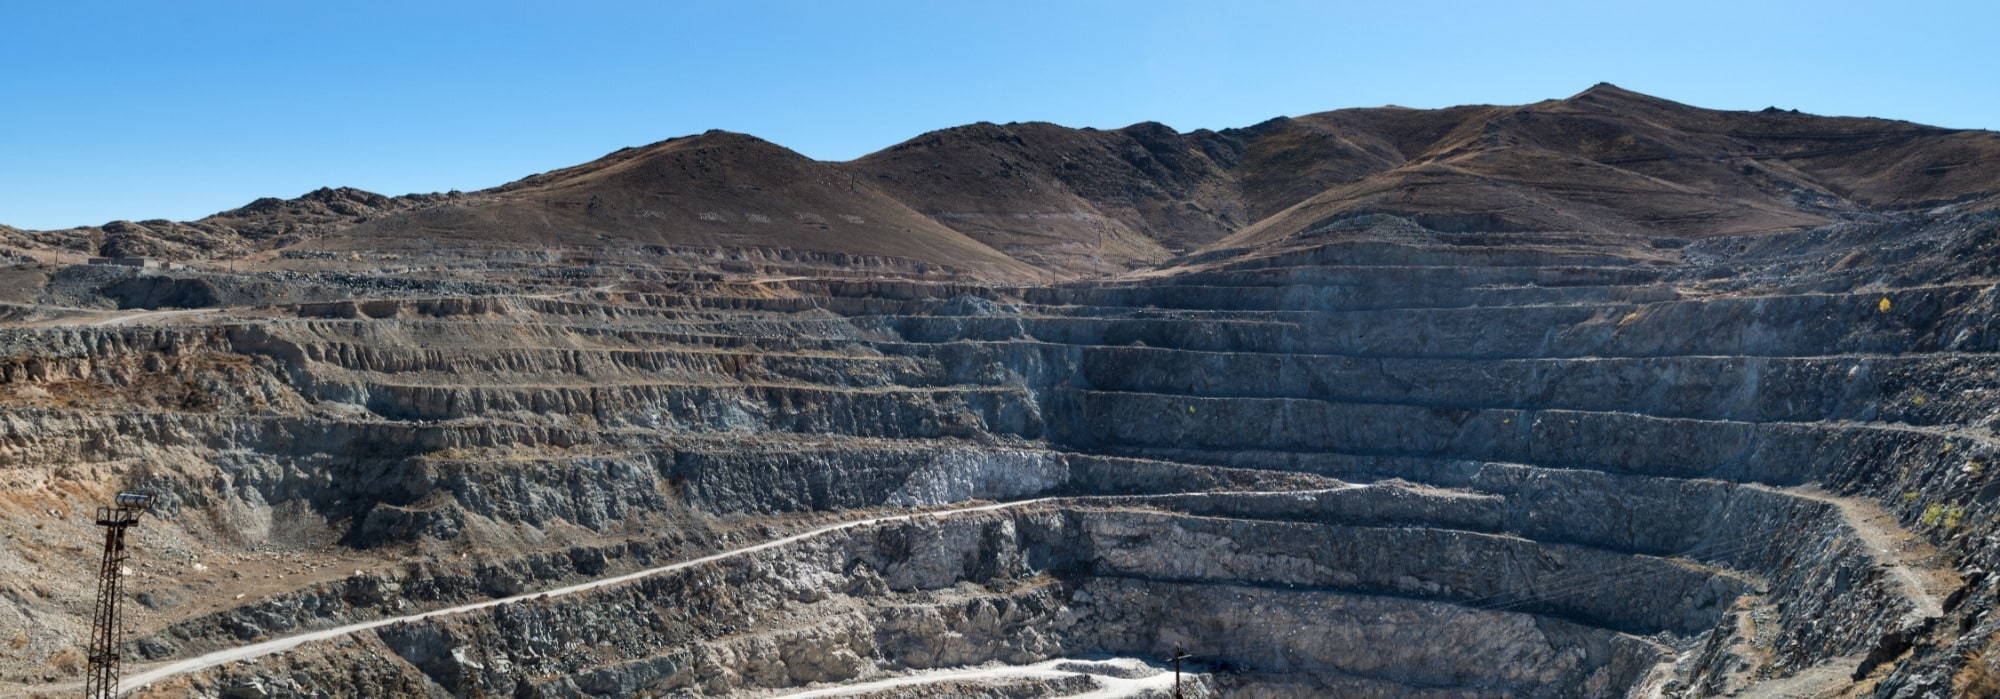 5 Mining Projects To Watch In 2020